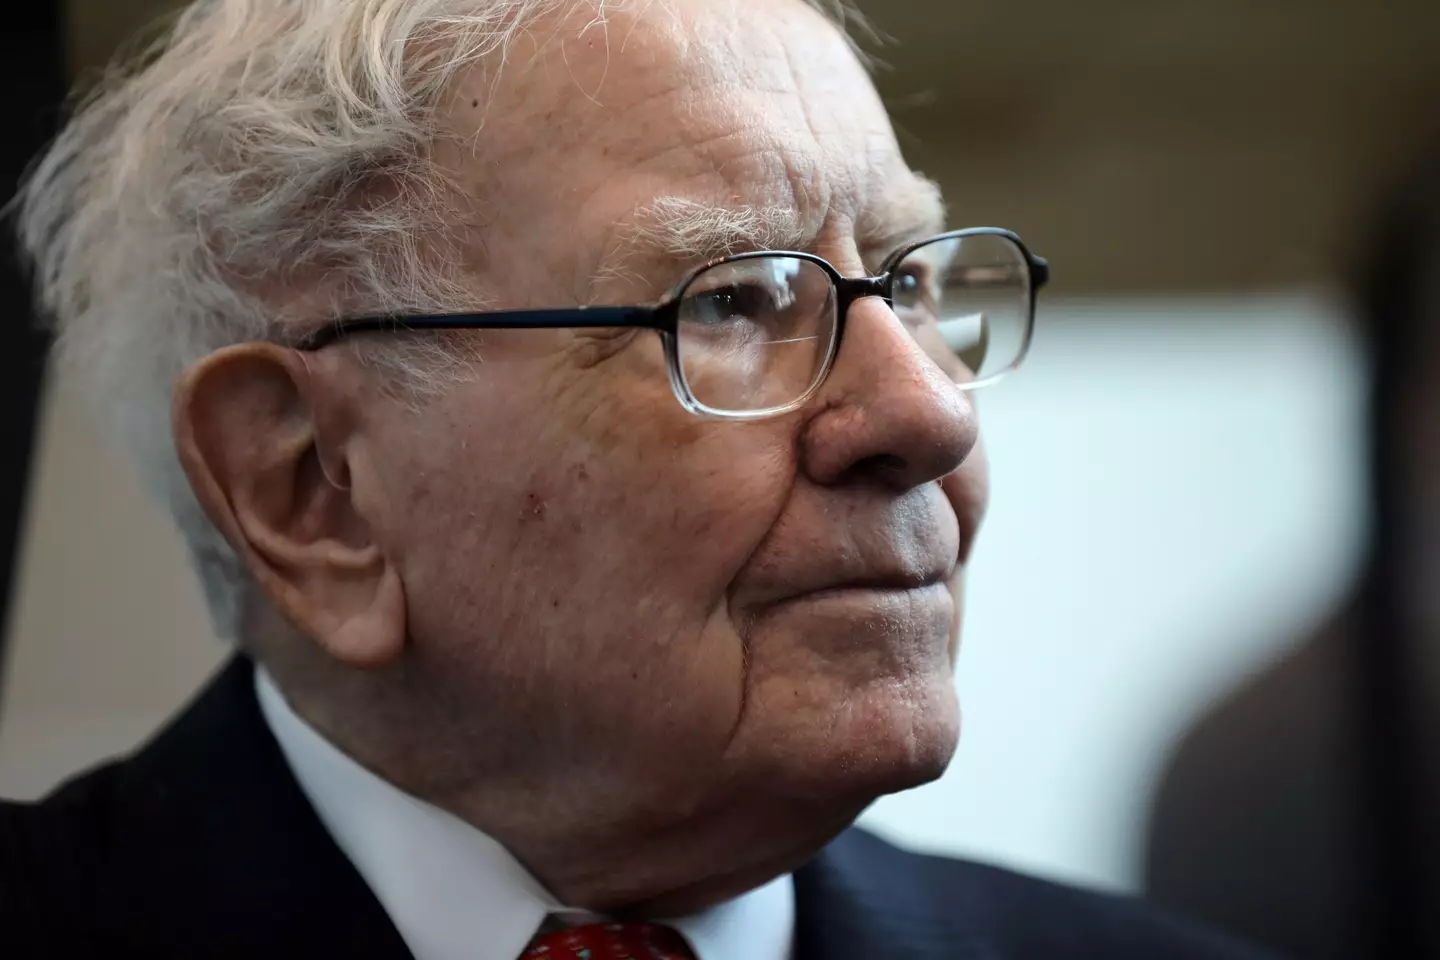 The Berkshire Hathaway CEO has seen his company's stocks rise this year, pushing him up the wealth index.